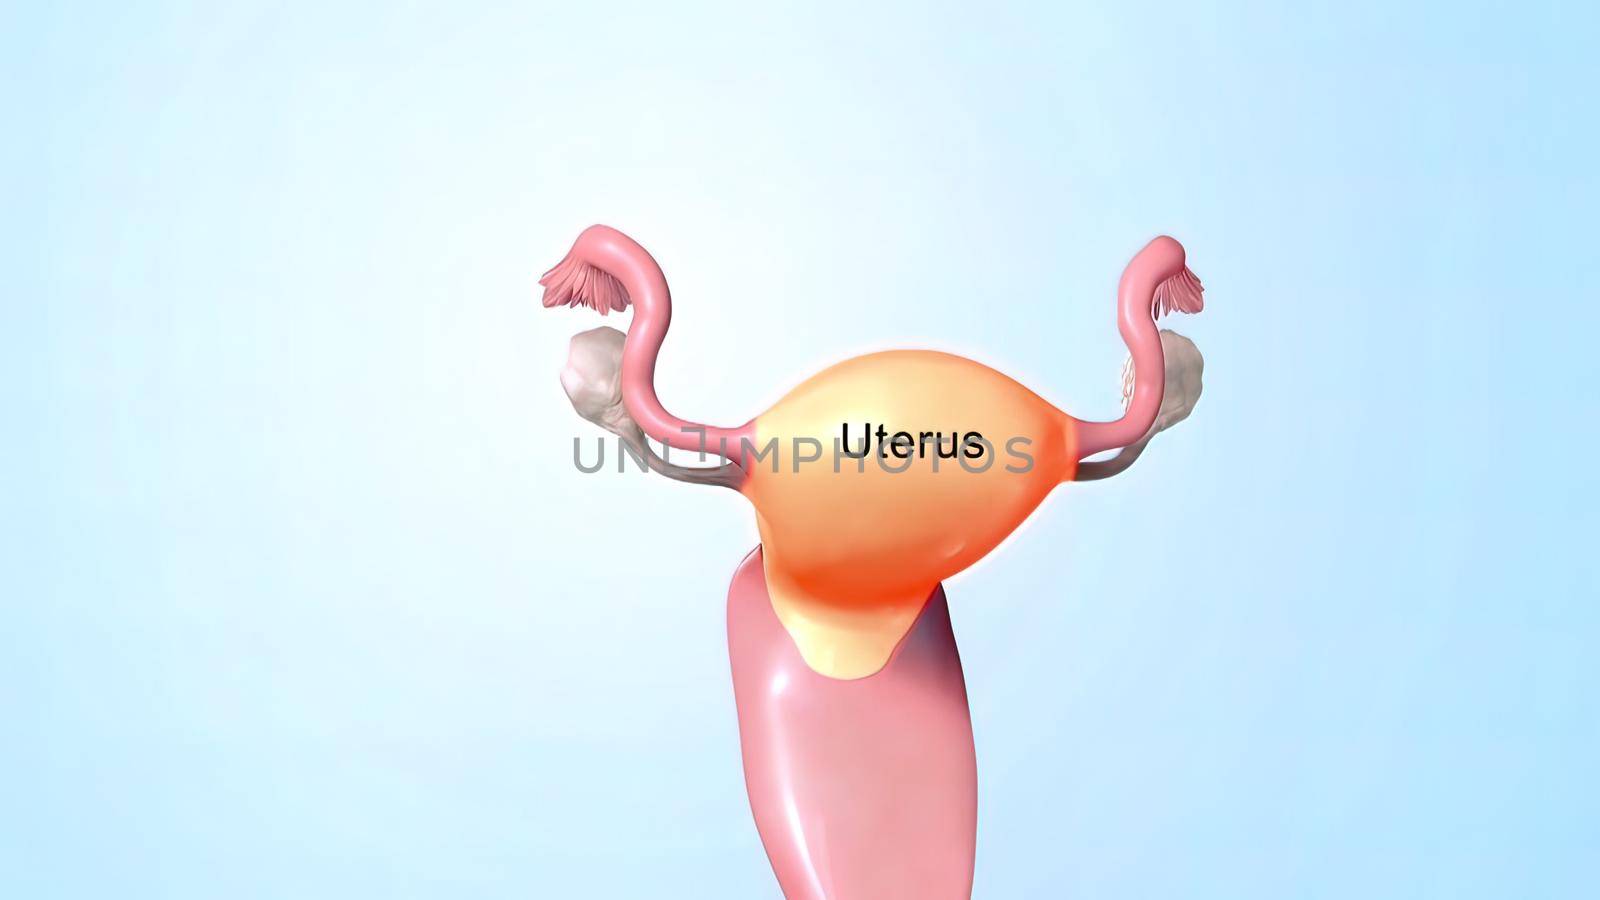 Female reproductive organ, sperm entering the canal. 3D illustration